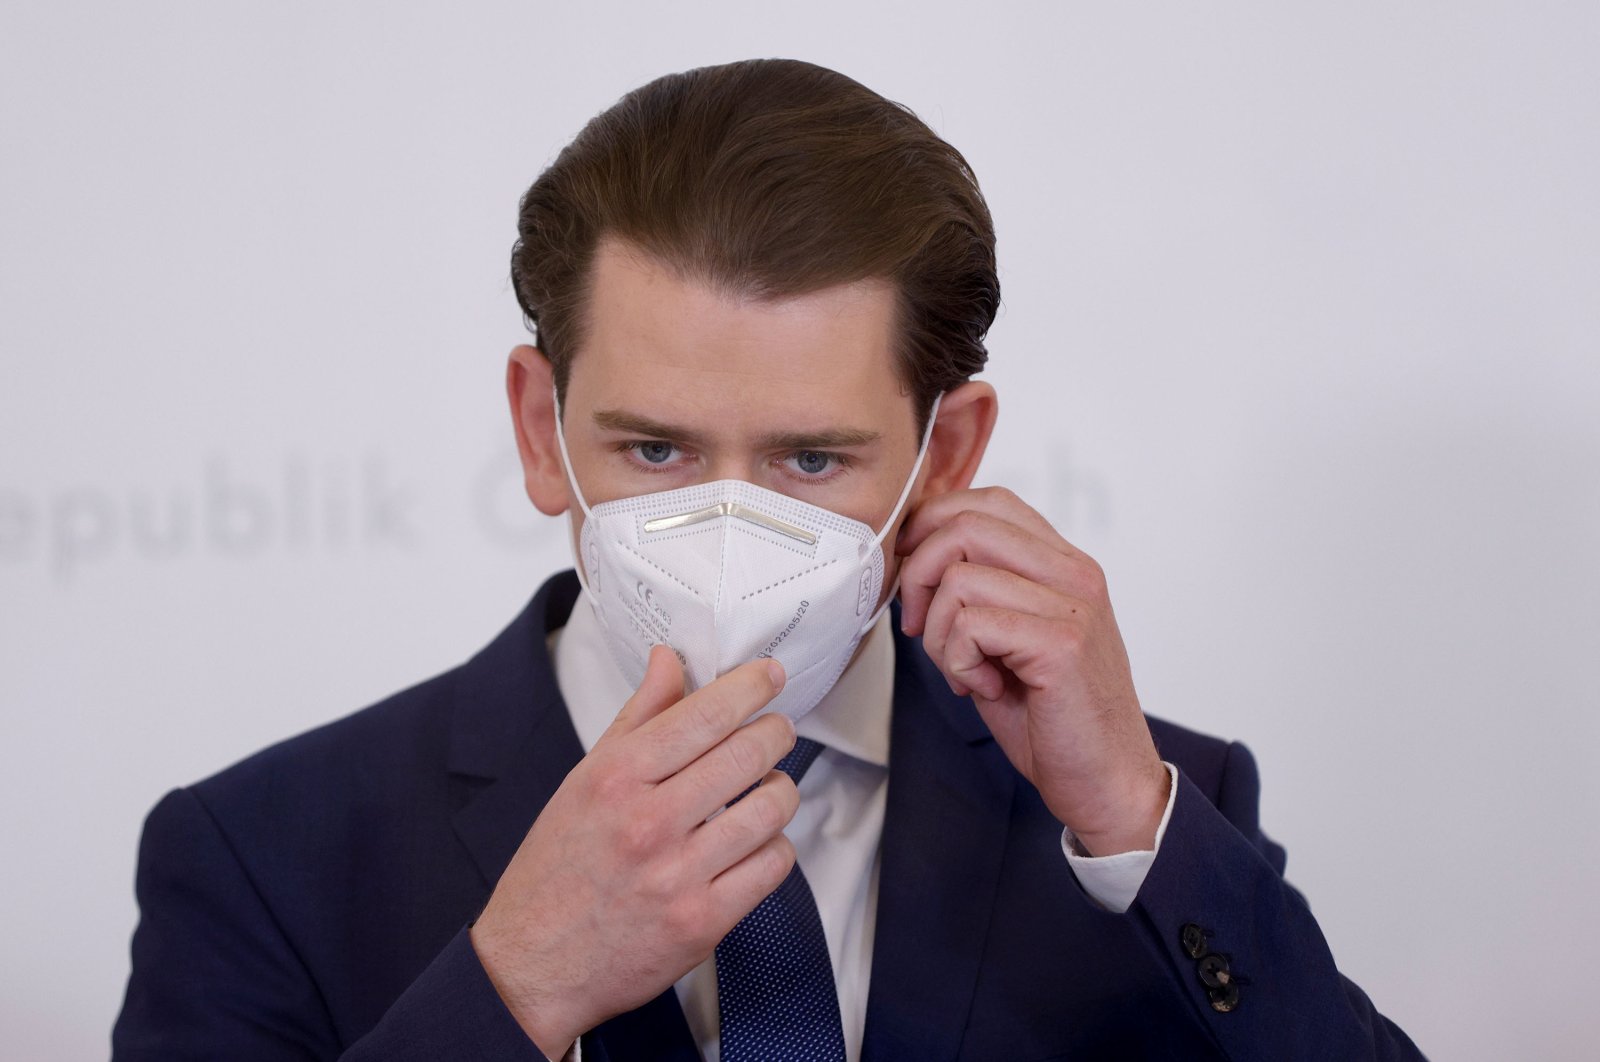 Austria's Chancellor Sebastian Kurz arrives for a news conference, as the spread of the coronavirus disease continues, in Vienna, Austria, May 28, 2021. (Reuters Photo)